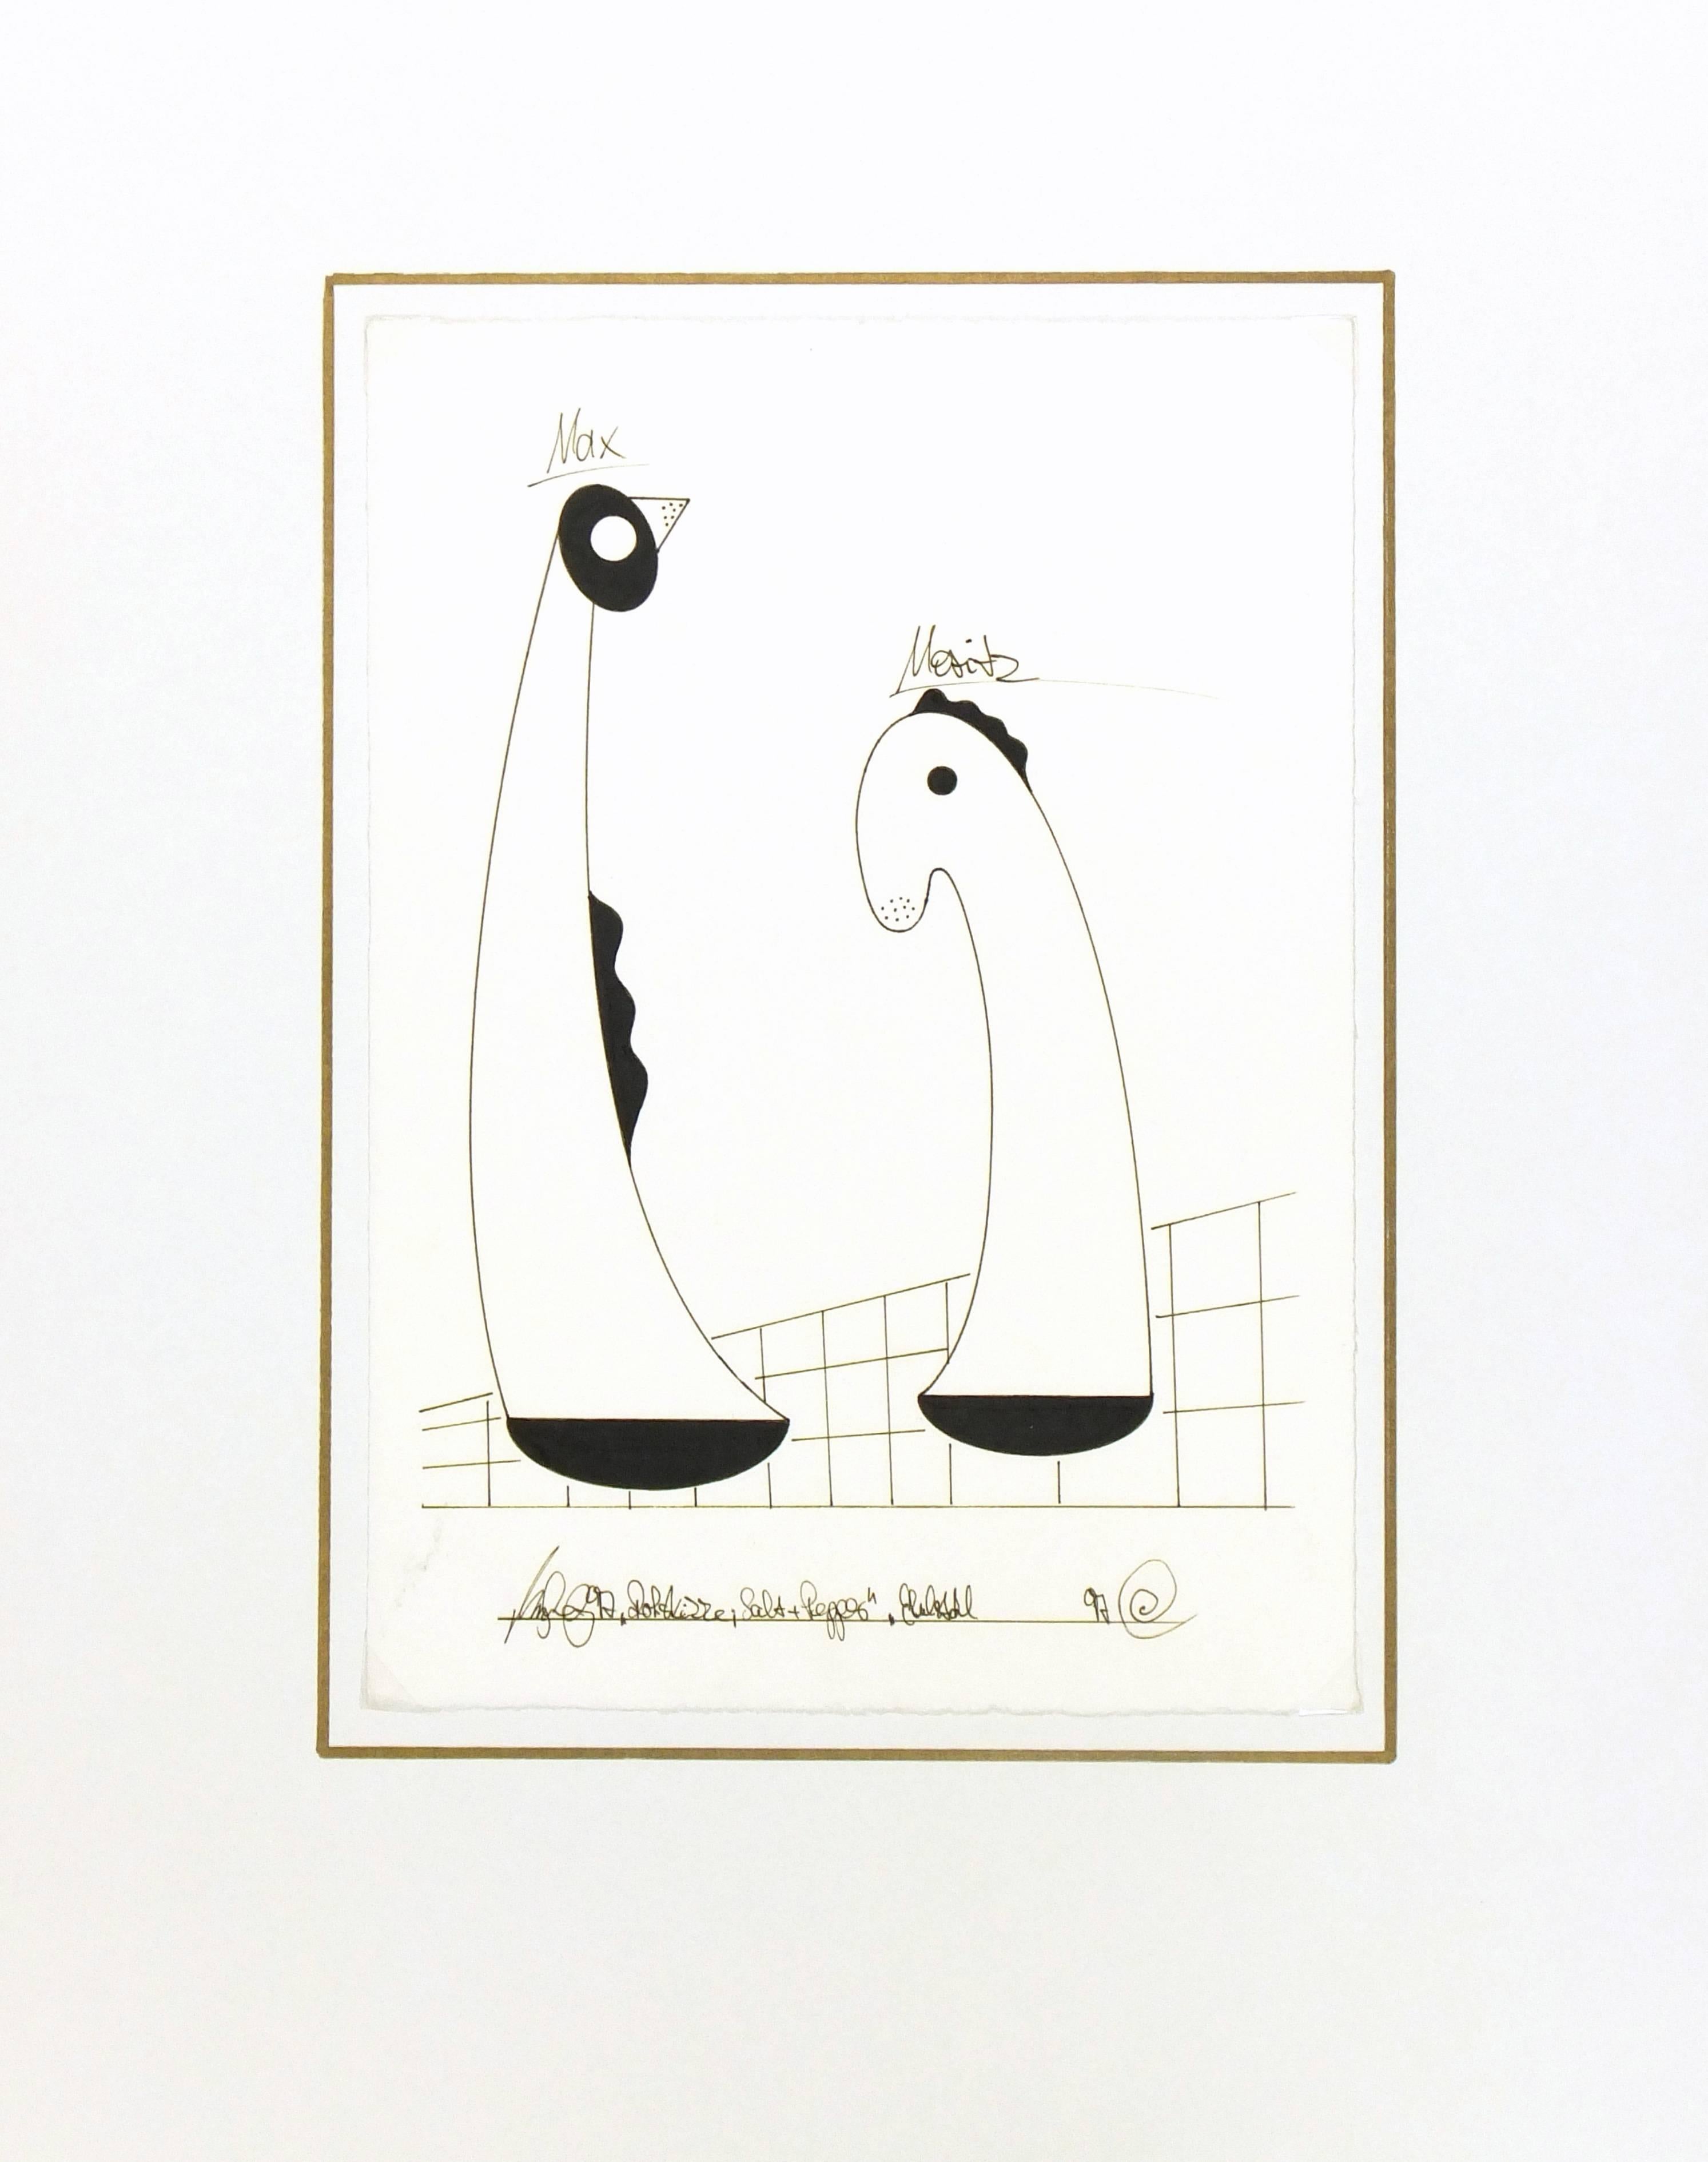 Pen and ink of two abstract bird-like figures, 1997. Signed, titled and dated in lower margin.

Original artwork on paper displayed on a white mat with a gold border. Archival plastic sleeve and Certificate of Authenticity included. Artwork, 8.5